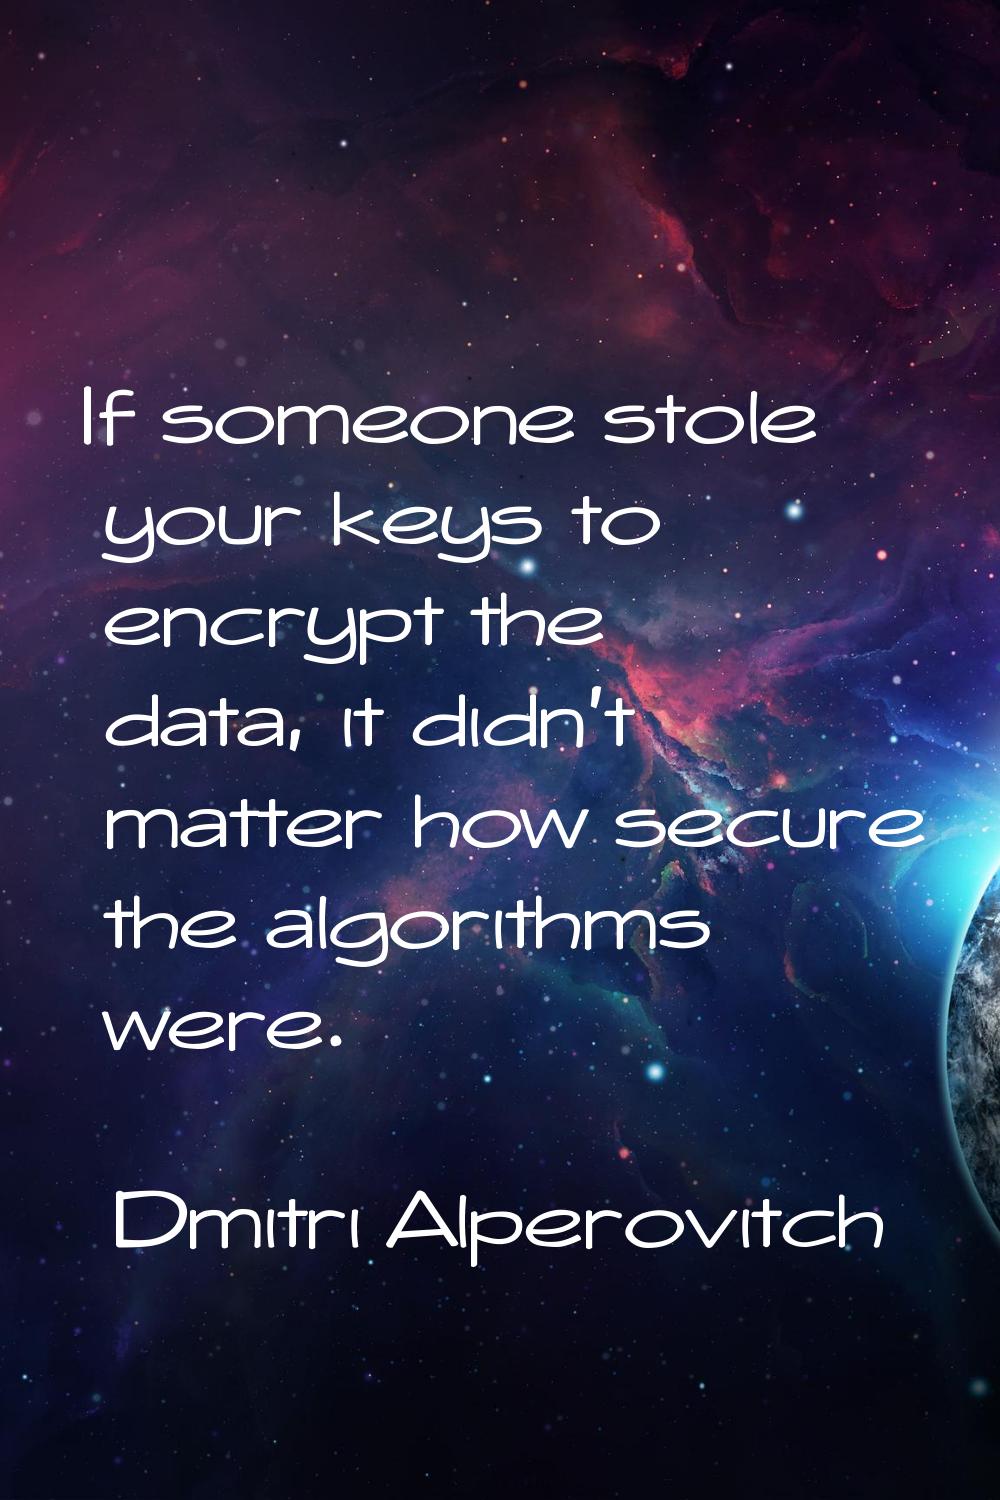 If someone stole your keys to encrypt the data, it didn't matter how secure the algorithms were.